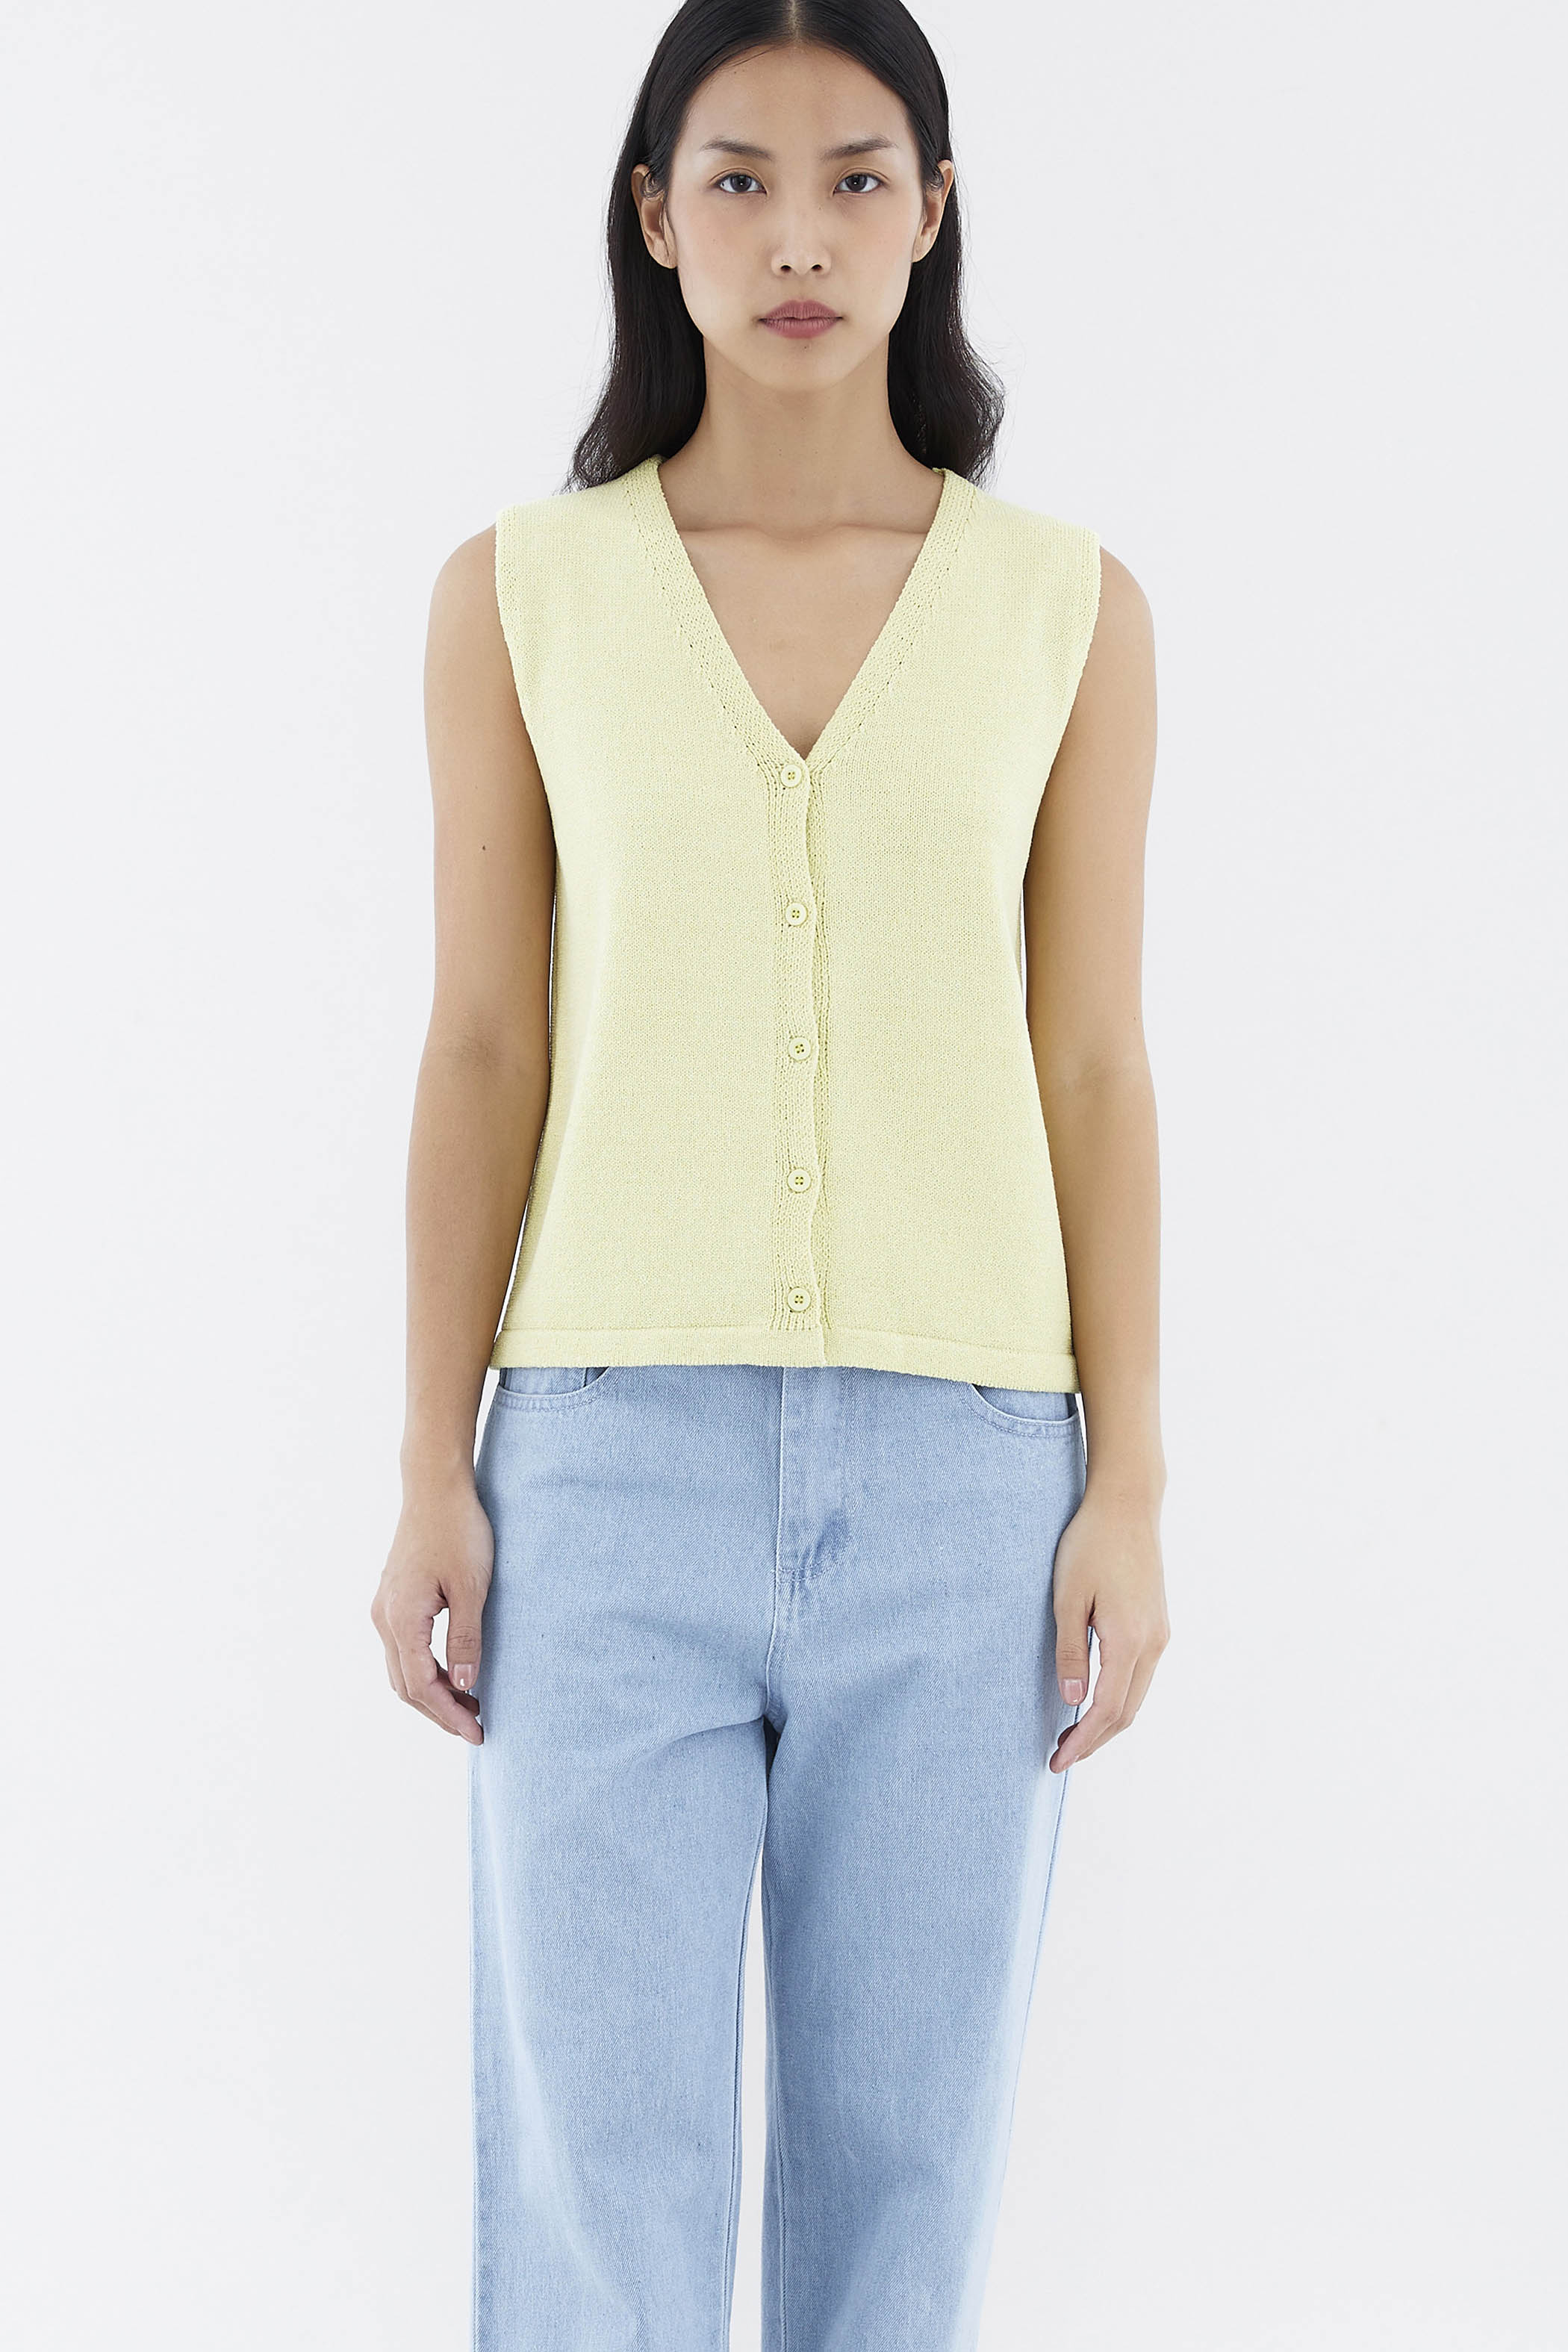 Mykael Relaxed Knit Top